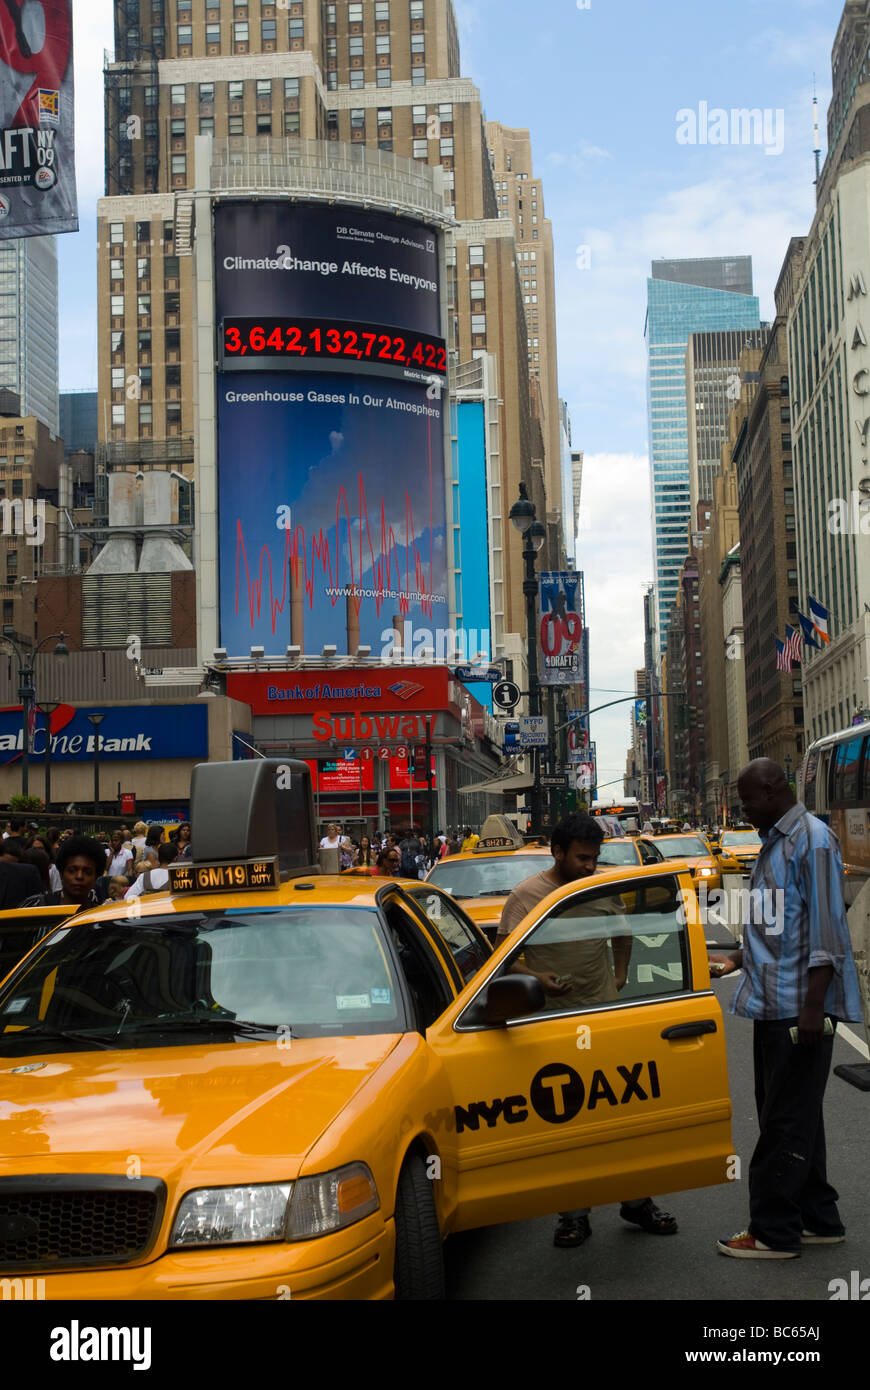 The Carbon Counter billboard in New York tracks the amount of greenhouse gases in the atmosphere Stock Photo